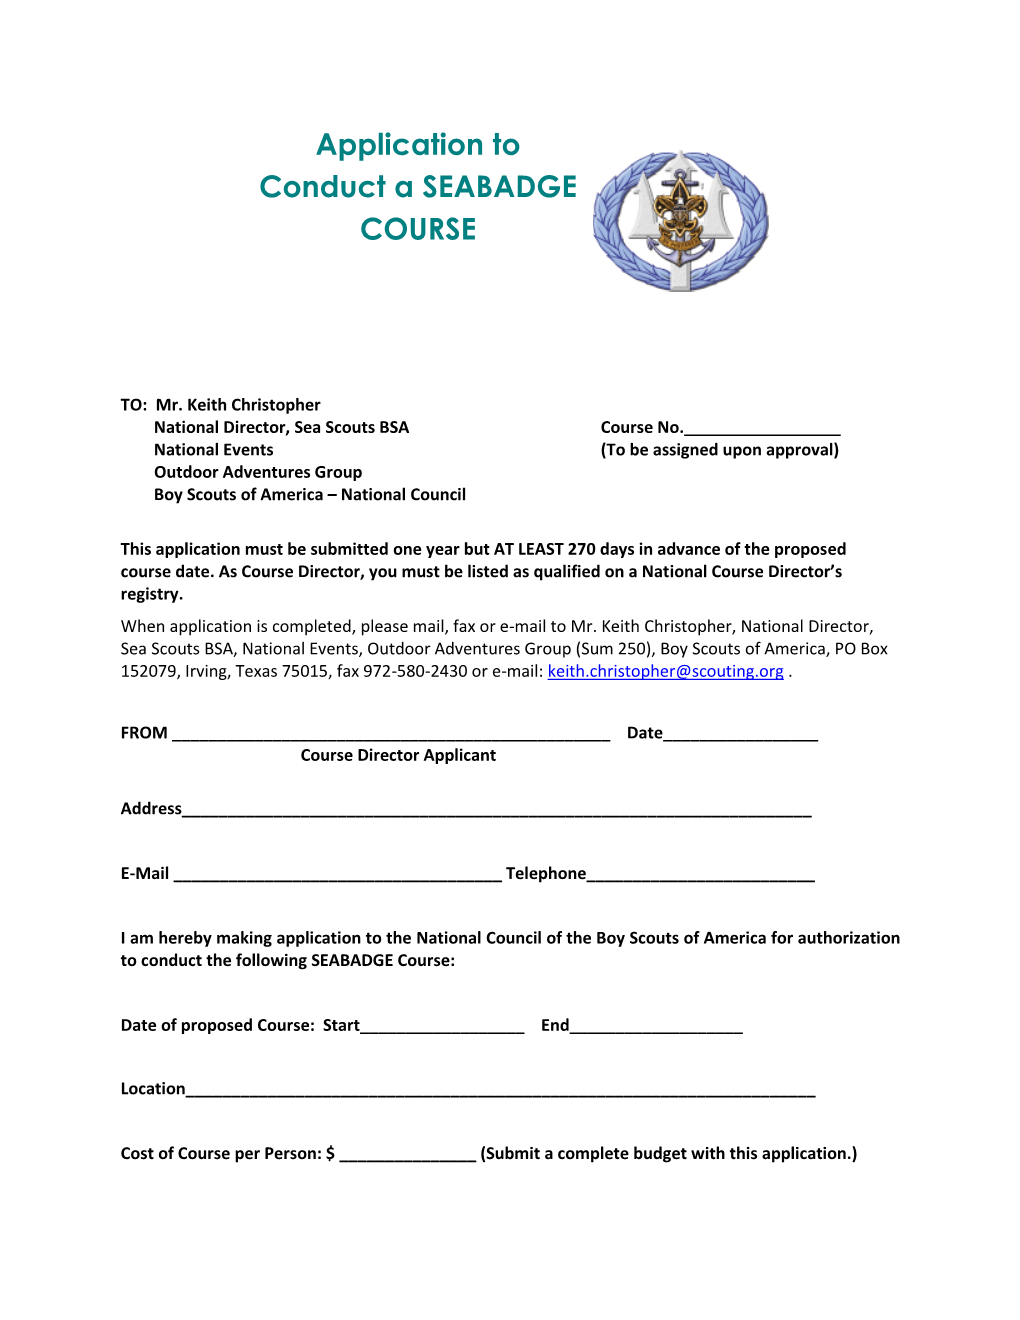 Application to Conduct a SEABADGE COURSE